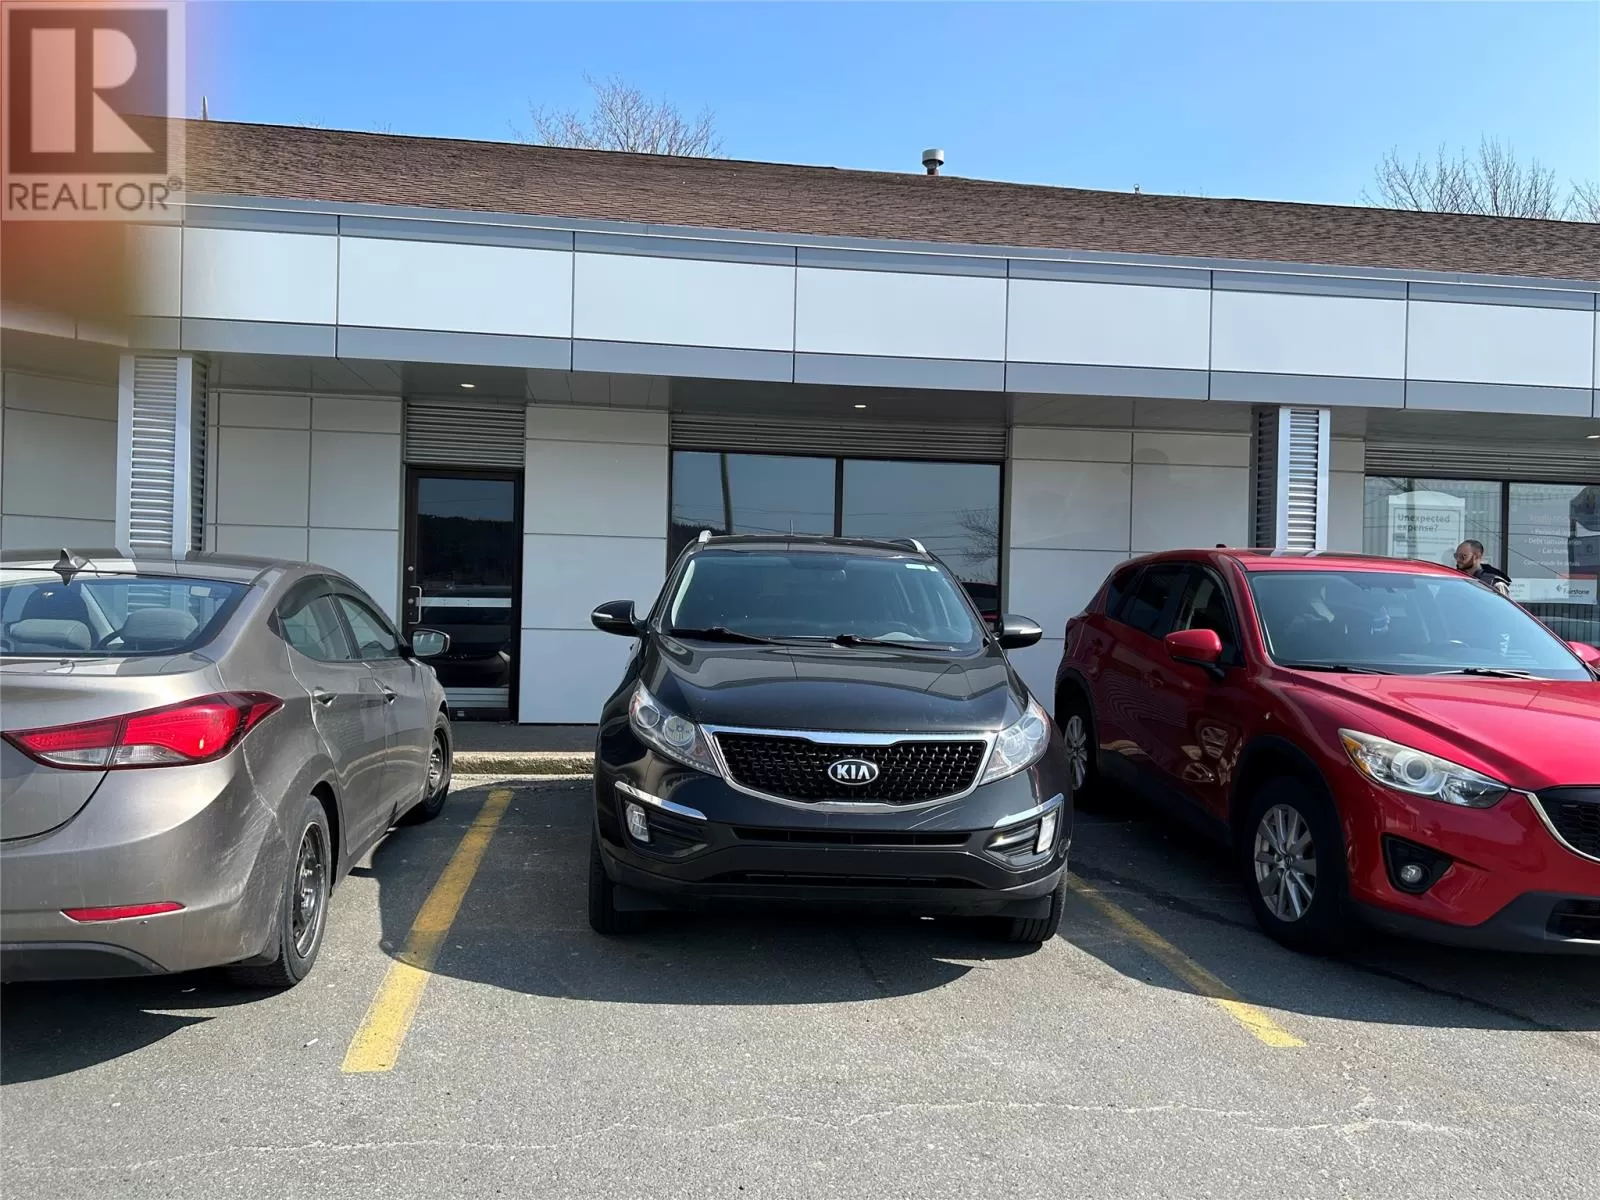 Other for rent: 11-17 Kenmount Road, St John's, Newfoundland & Labrador A1B 1W1